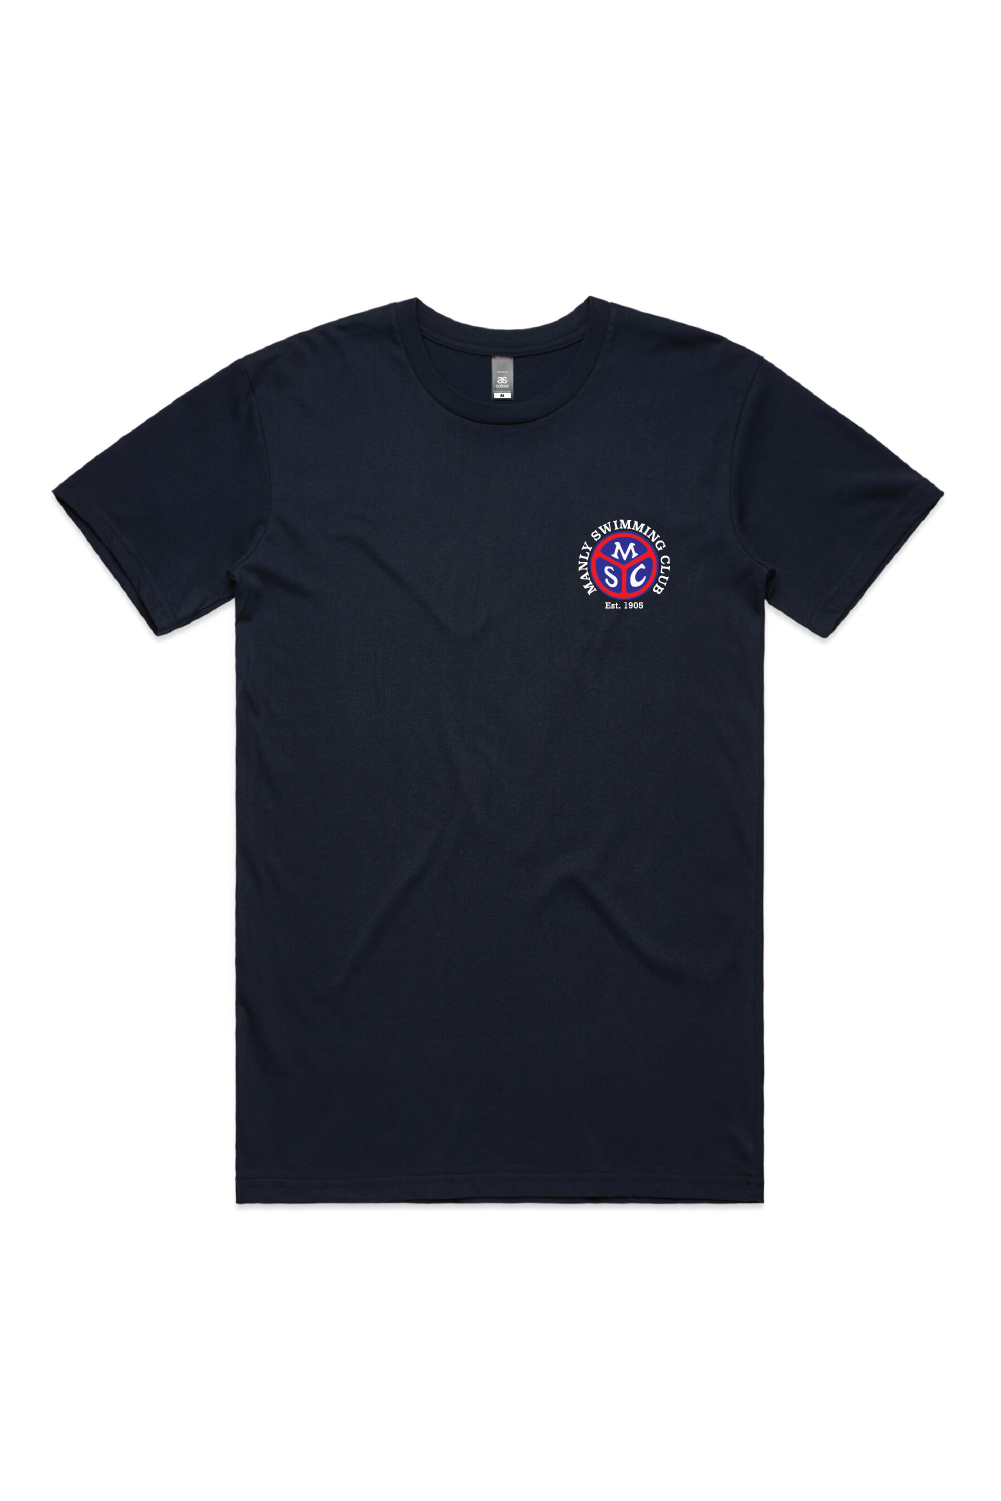 Manly Swimming Club Kid's Cotton Tee